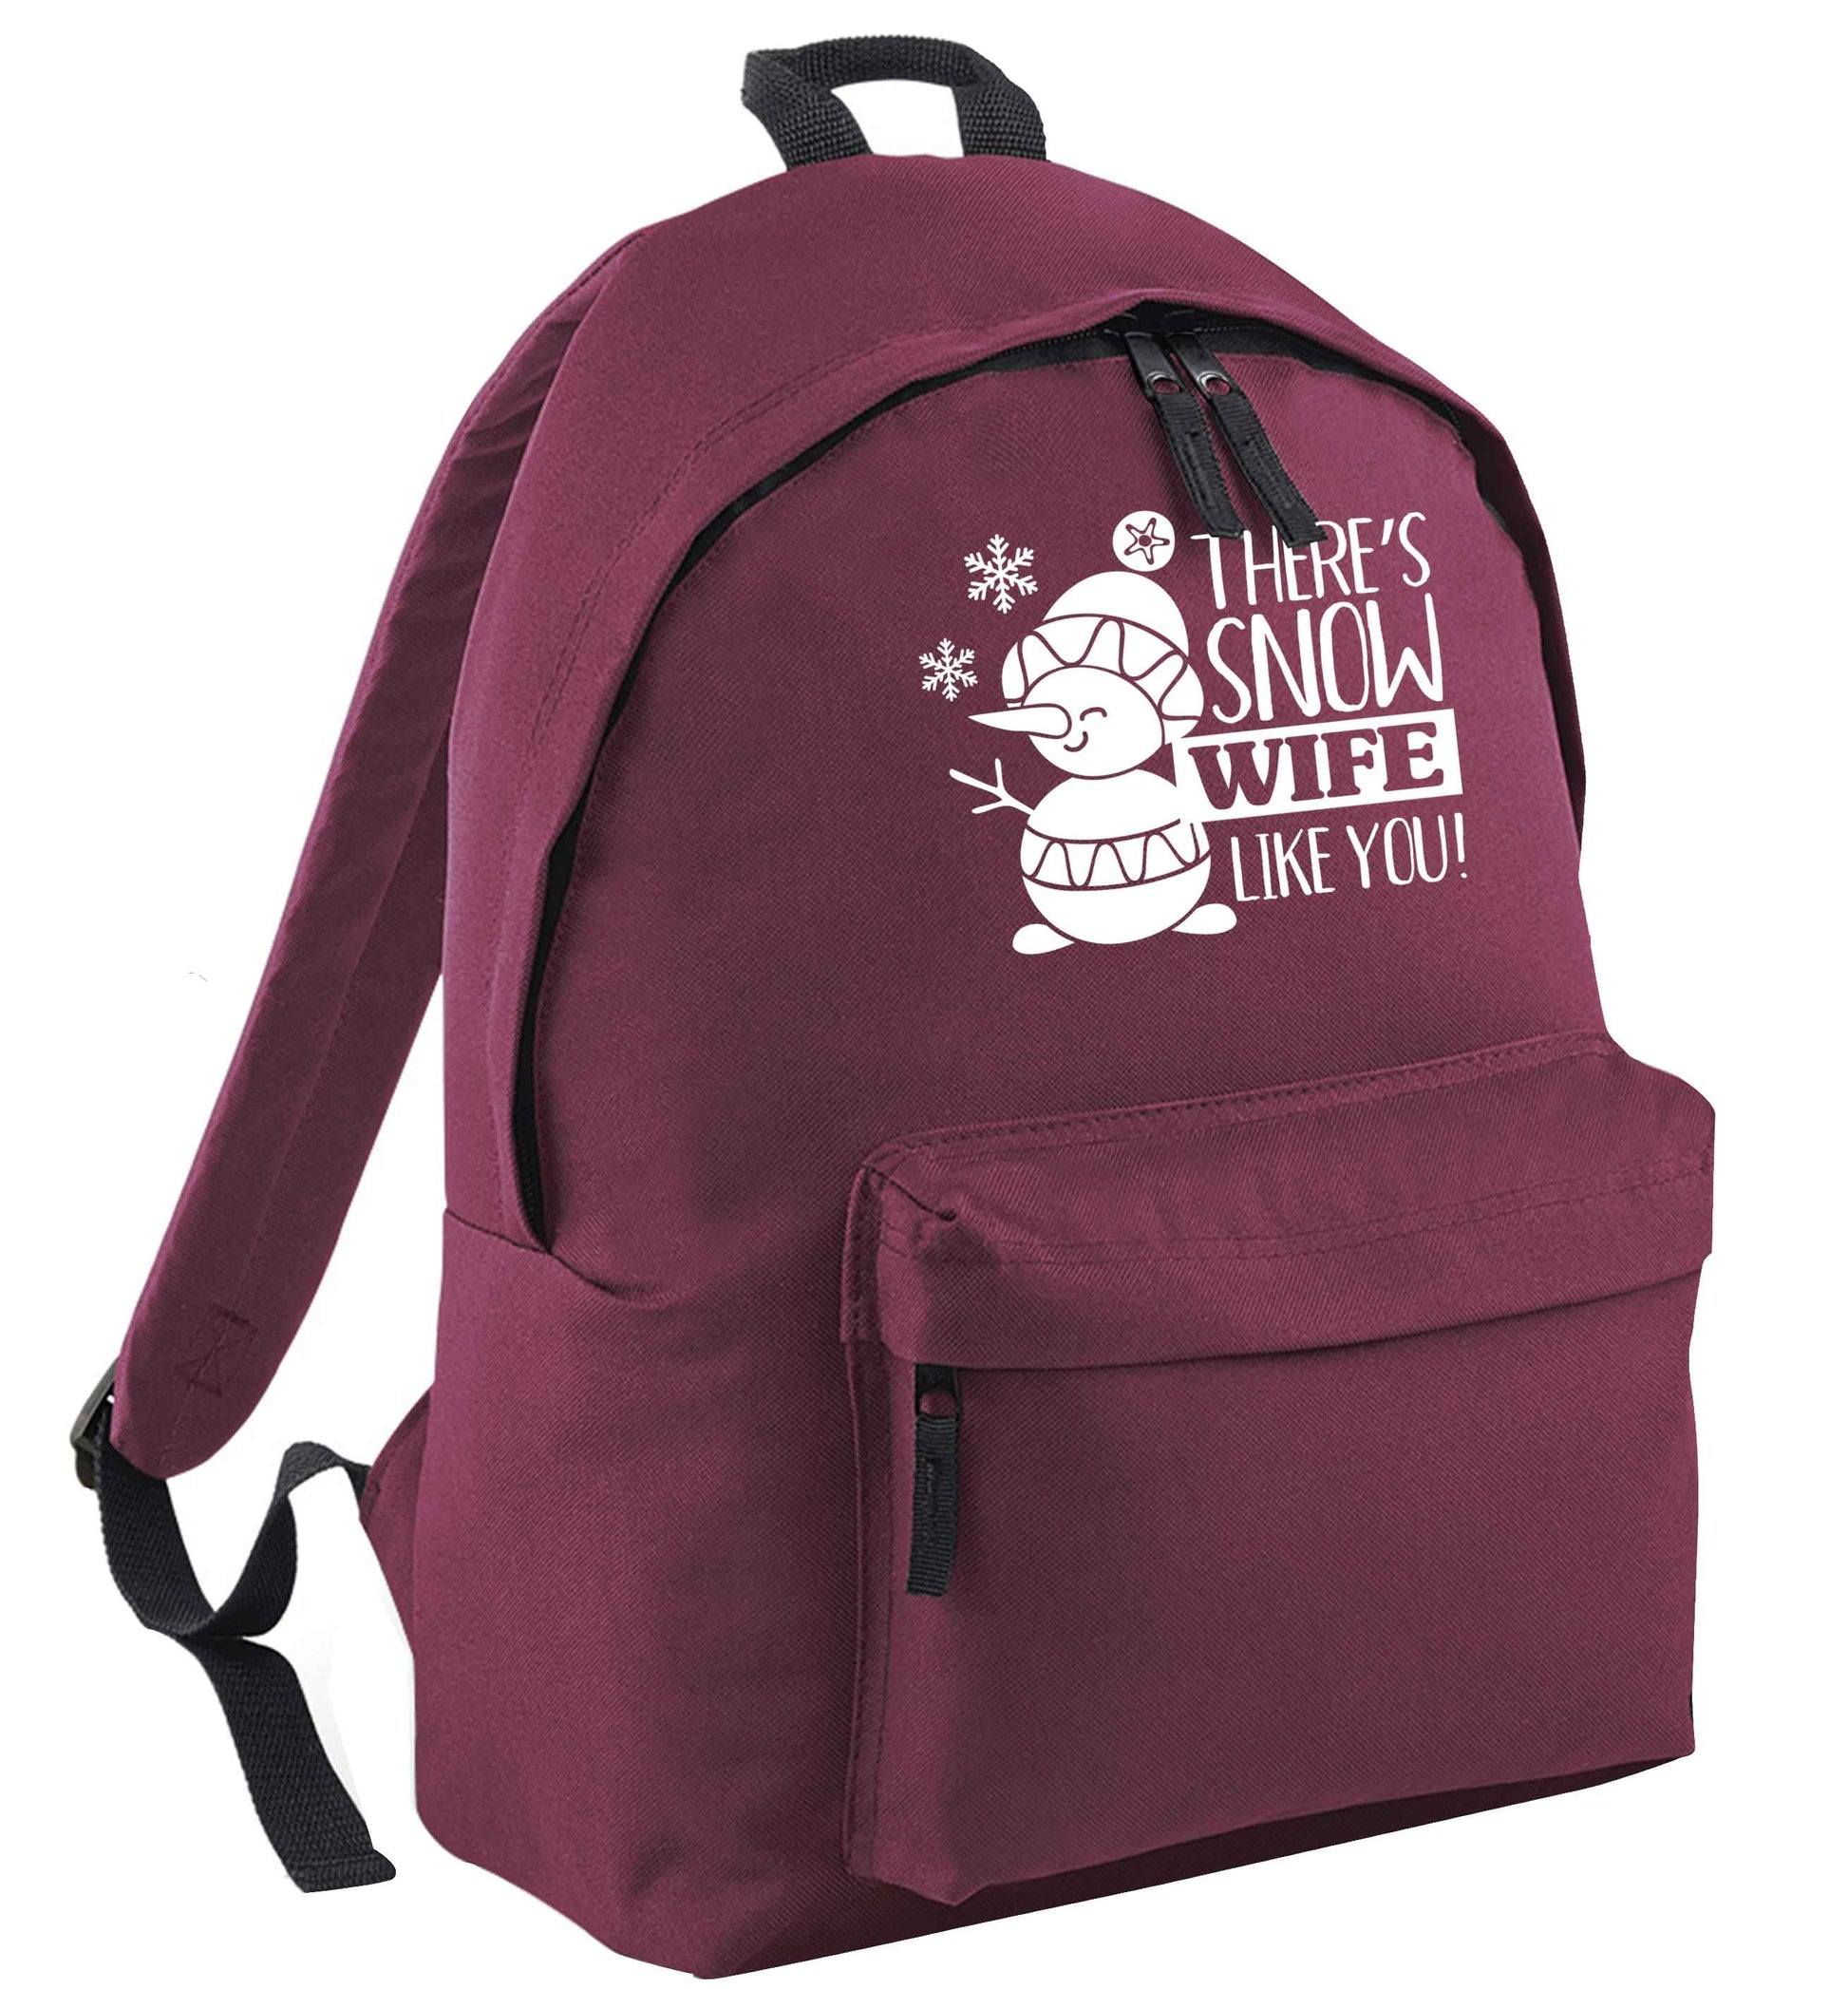 There's snow wife like you maroon adults backpack